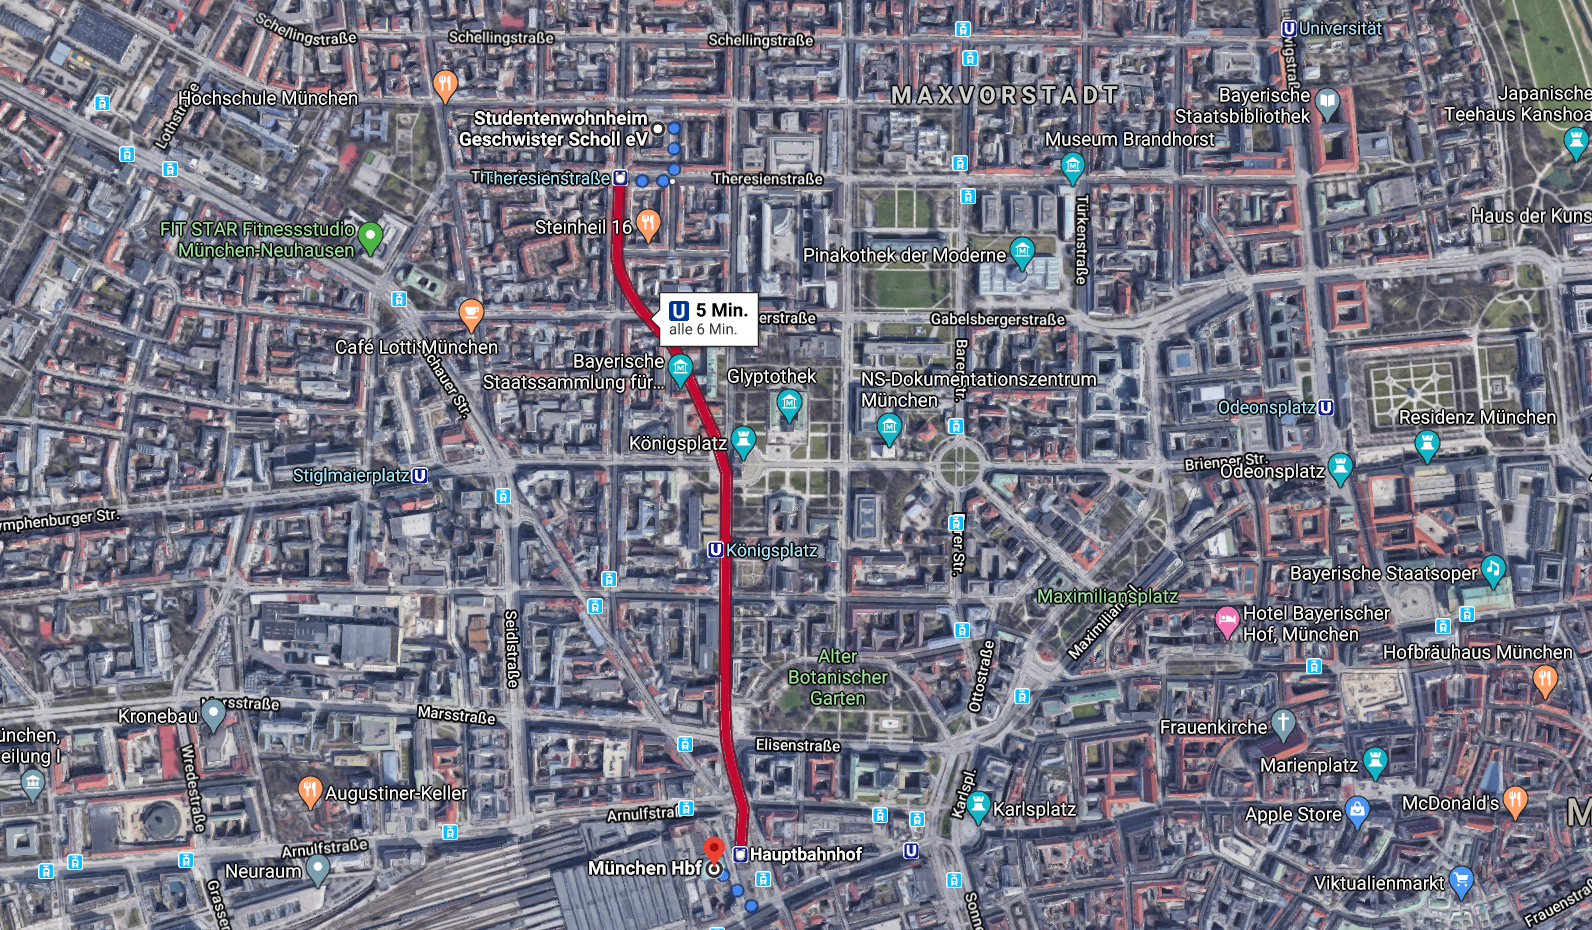 Route from Schollheim to the central station with U2 line